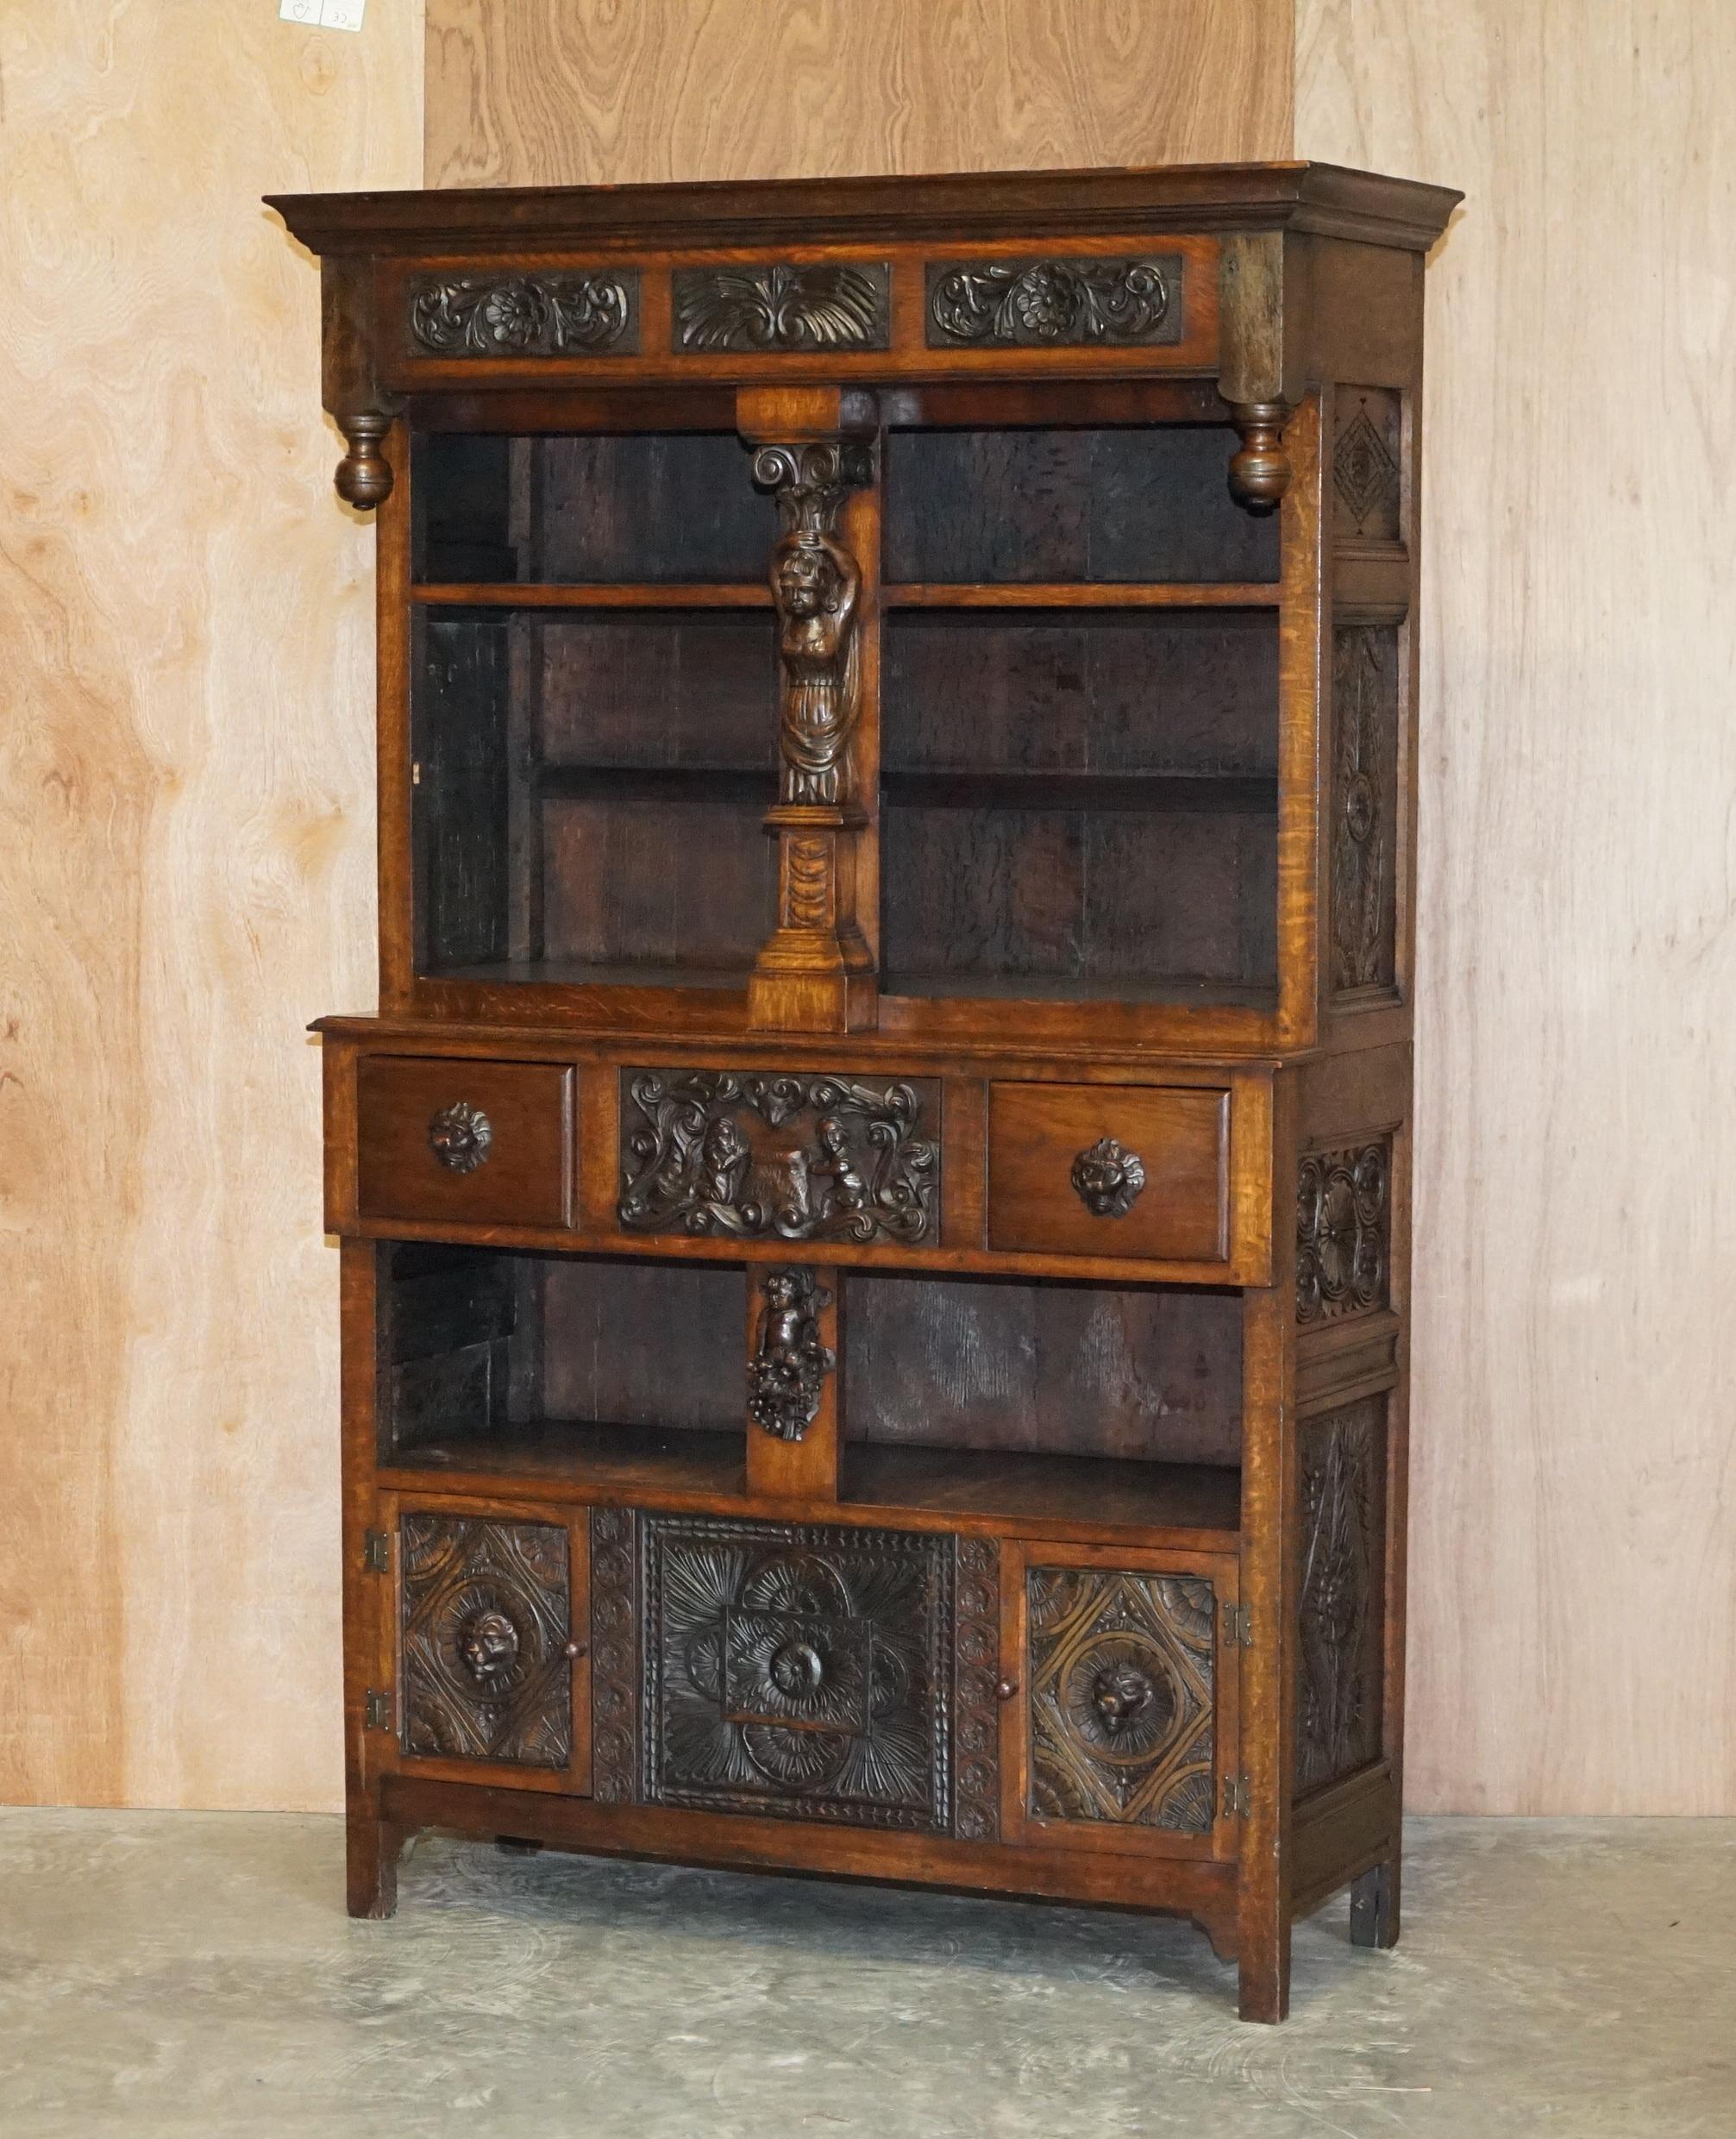 We are delighted to offer for this lovely heavily carved Italian bookcase pot cupboard with Lions head and putti’s

A very charming and finely made piece of antique Italian furniture. Its in solid oak, it has various drawers doors and shelves